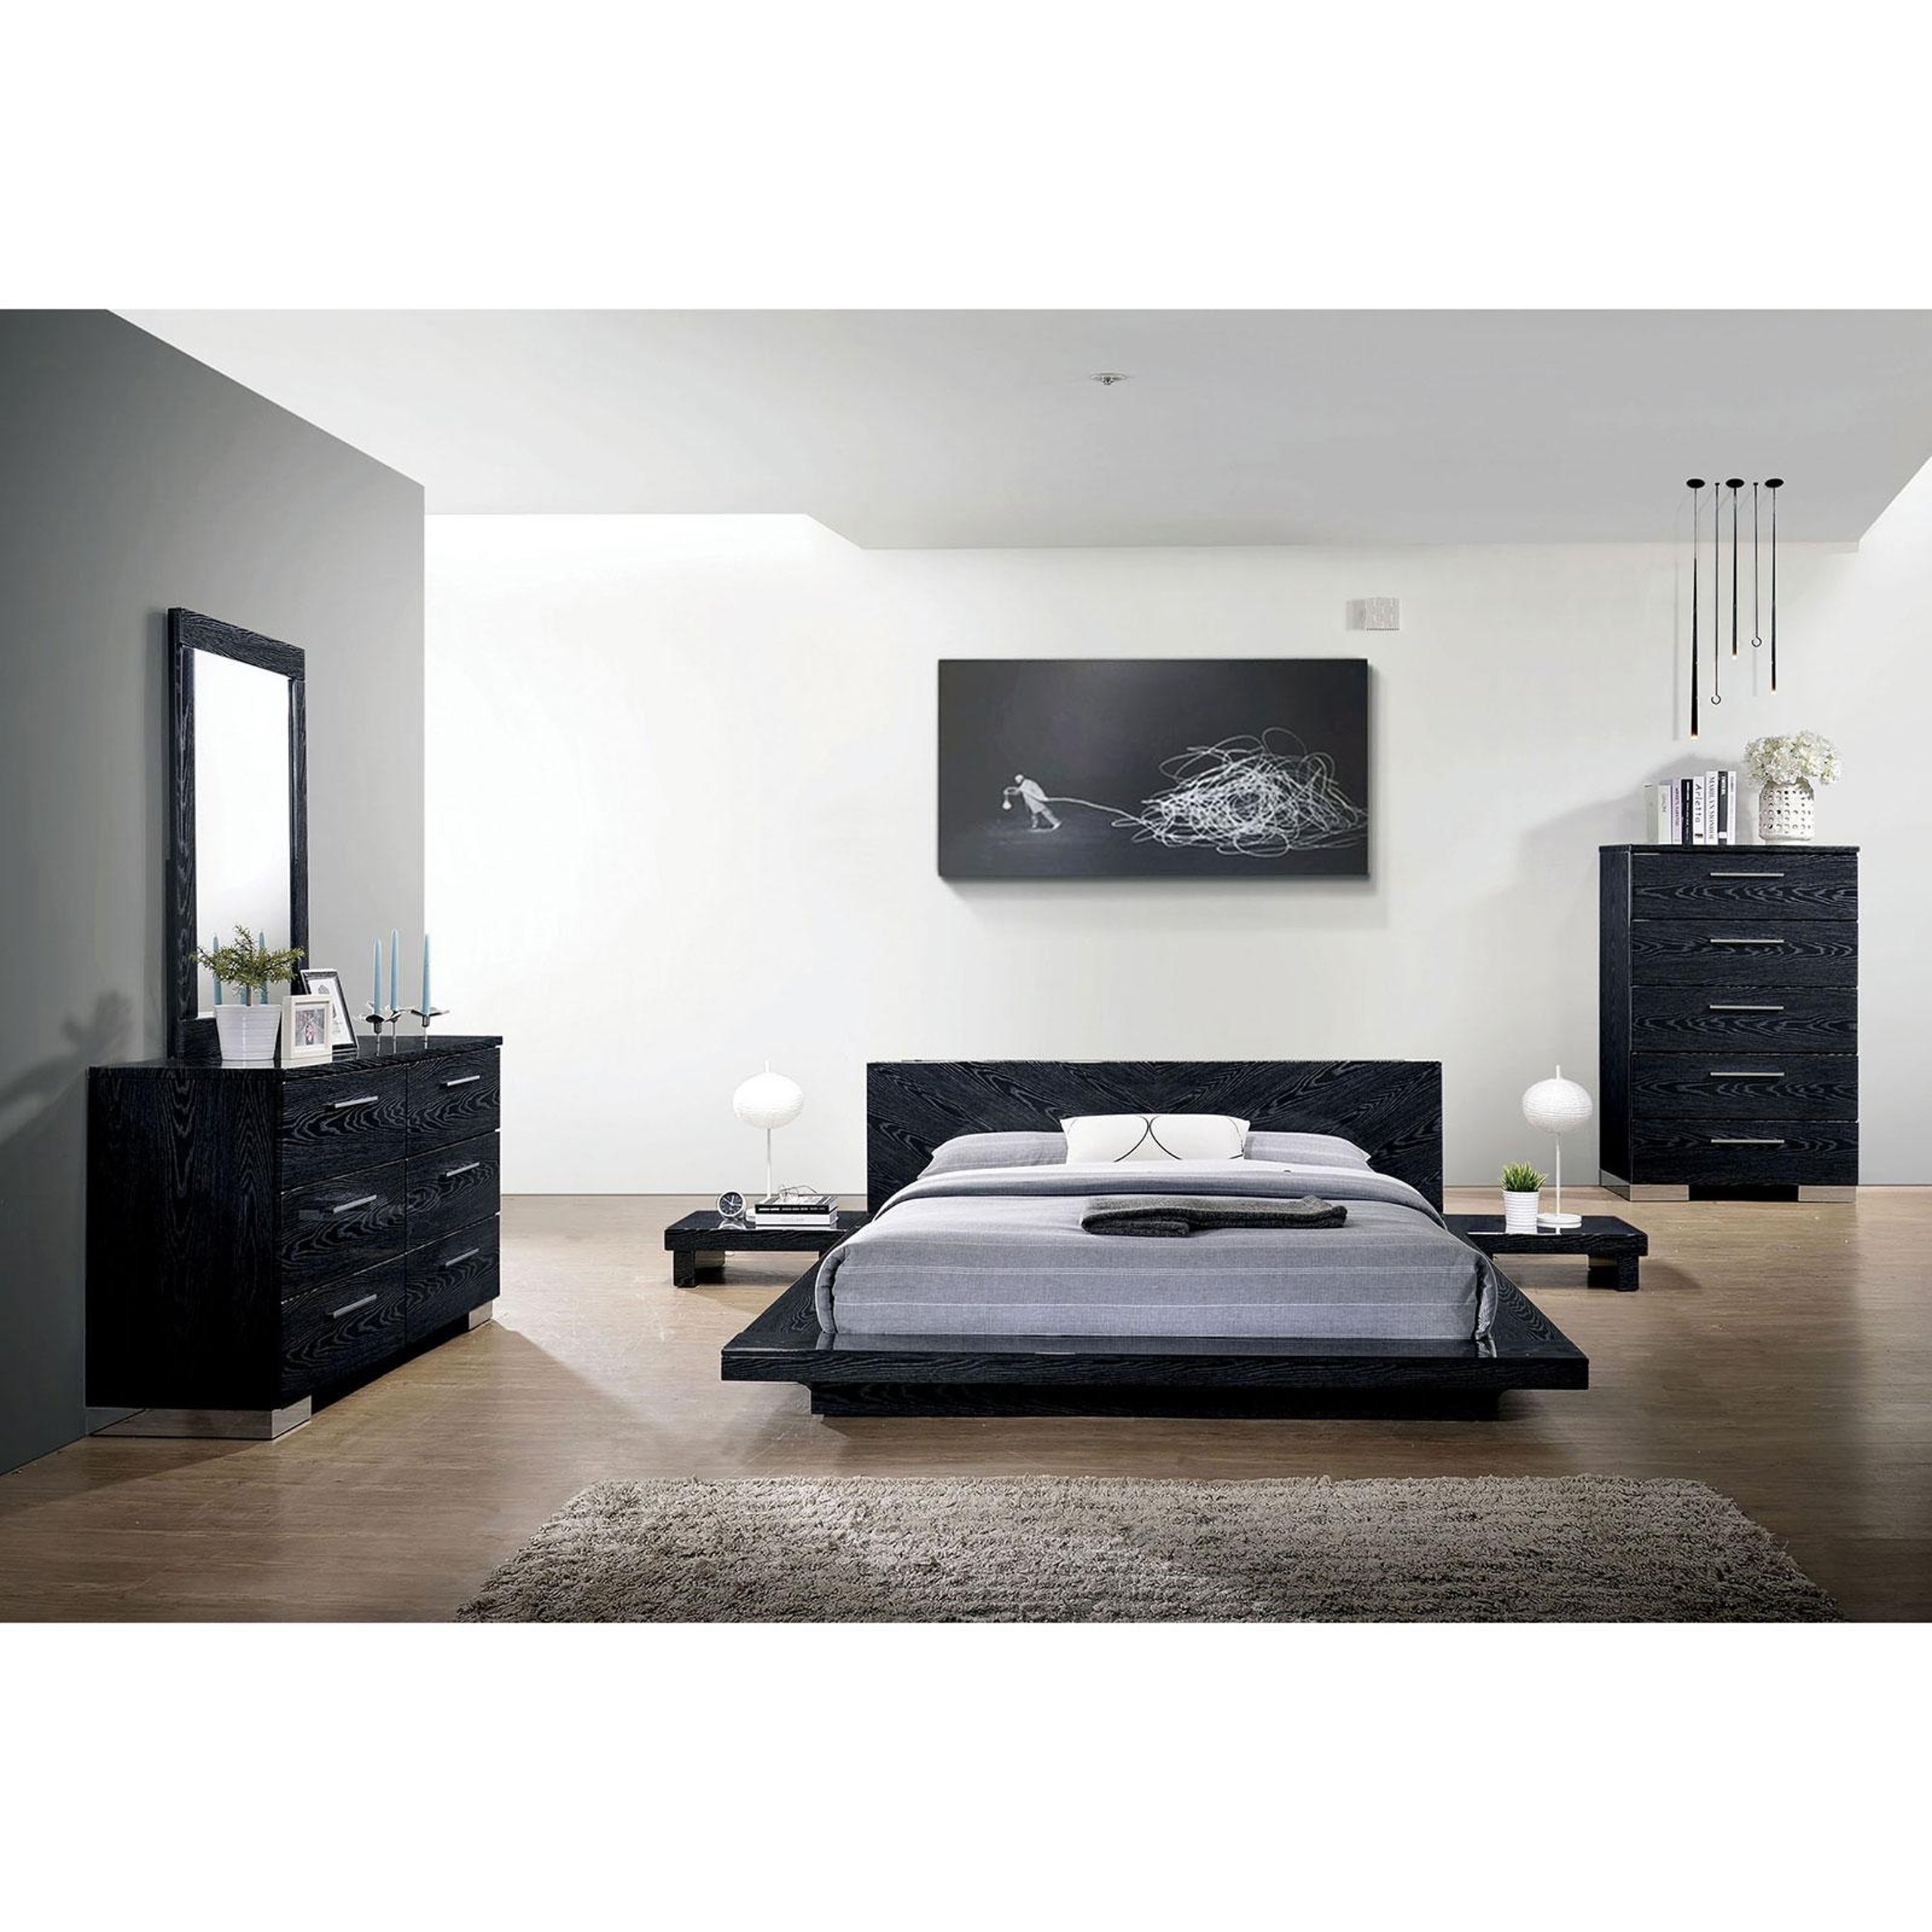 Contemporary Wood California King Platform Bed In Black Christie By Foa Group Buy Online On Ny